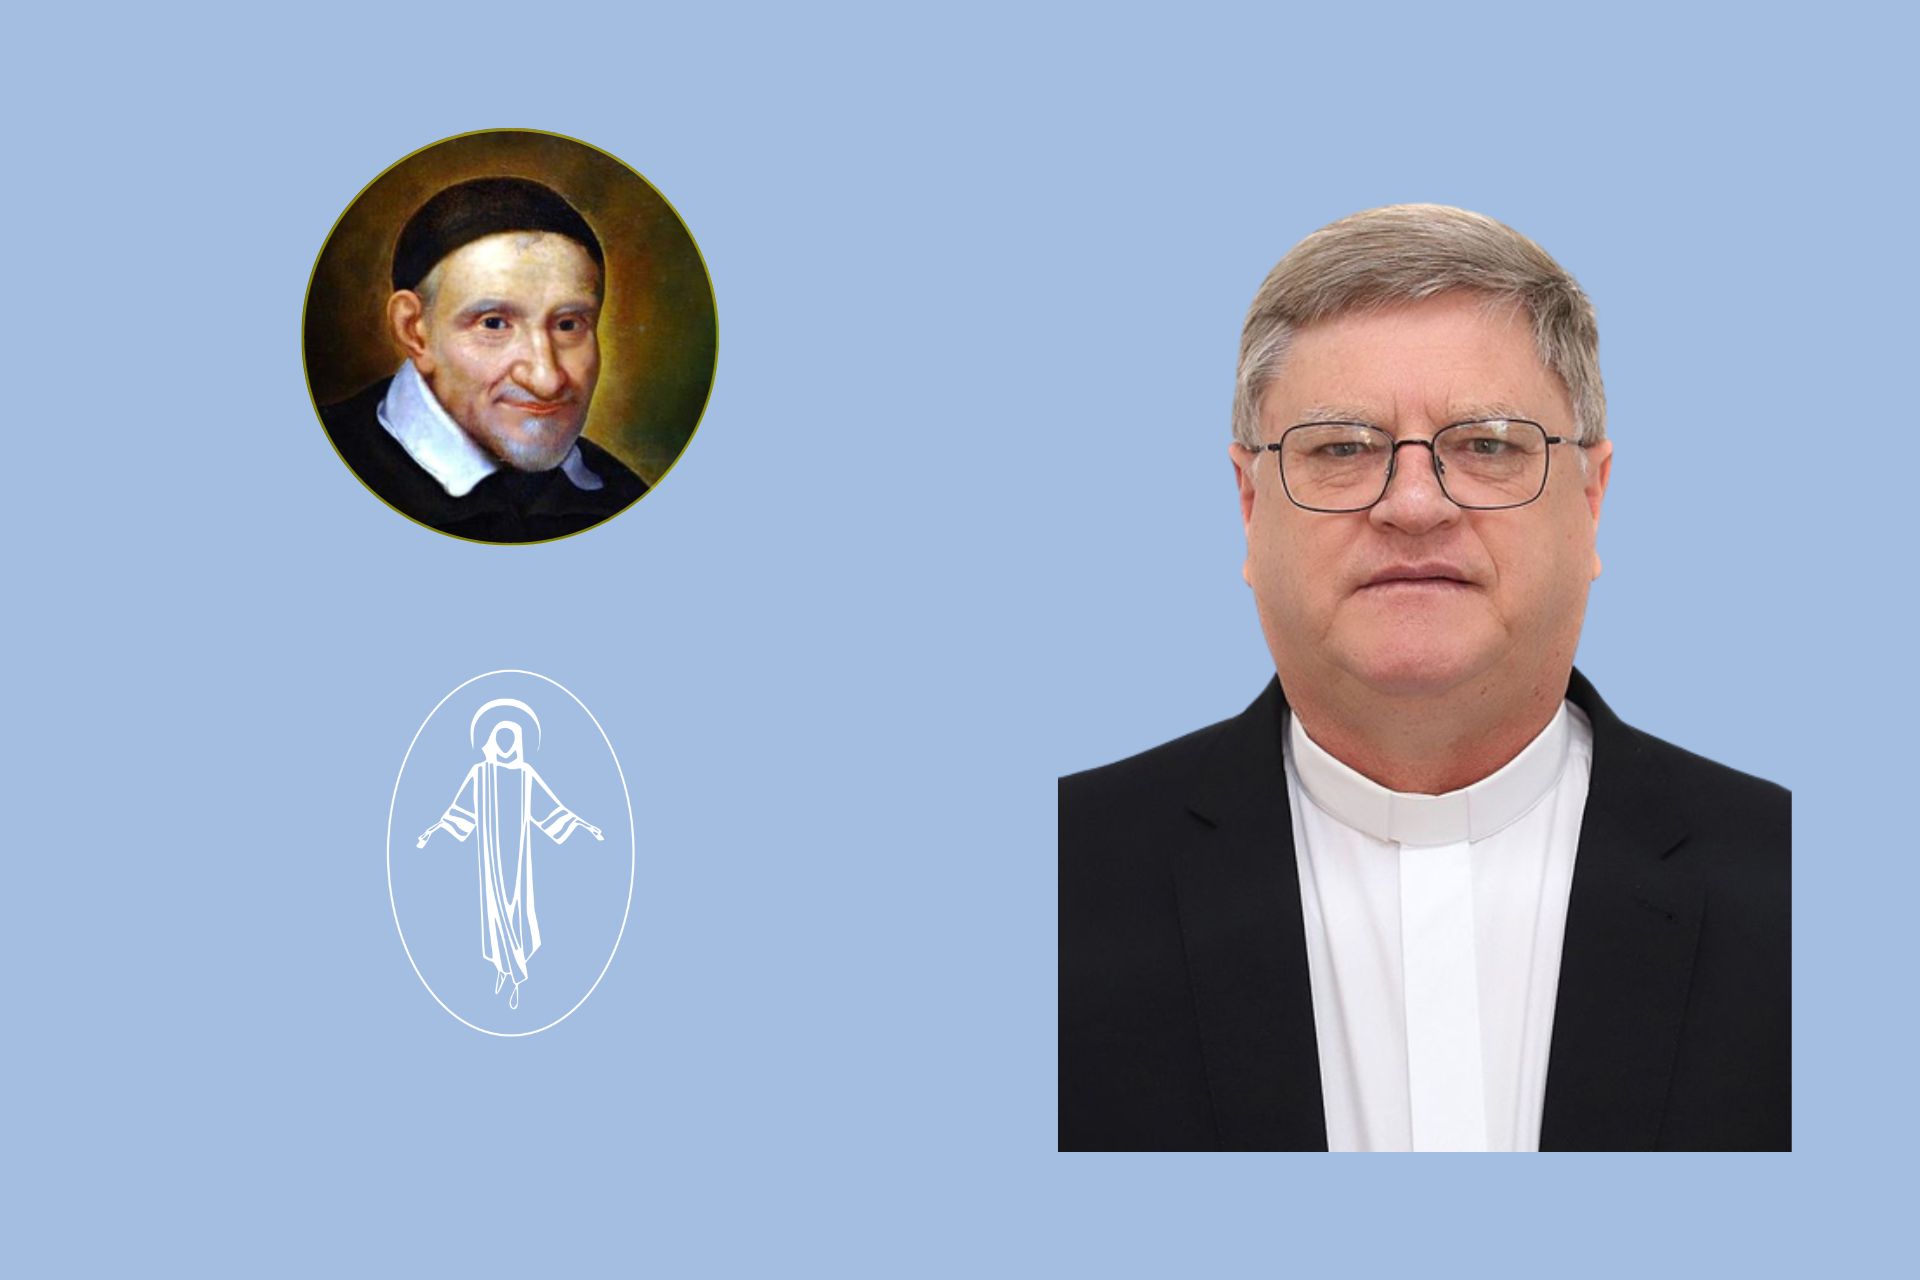 Conference of Visitors in Latin America - CLAPVI - Congregation of